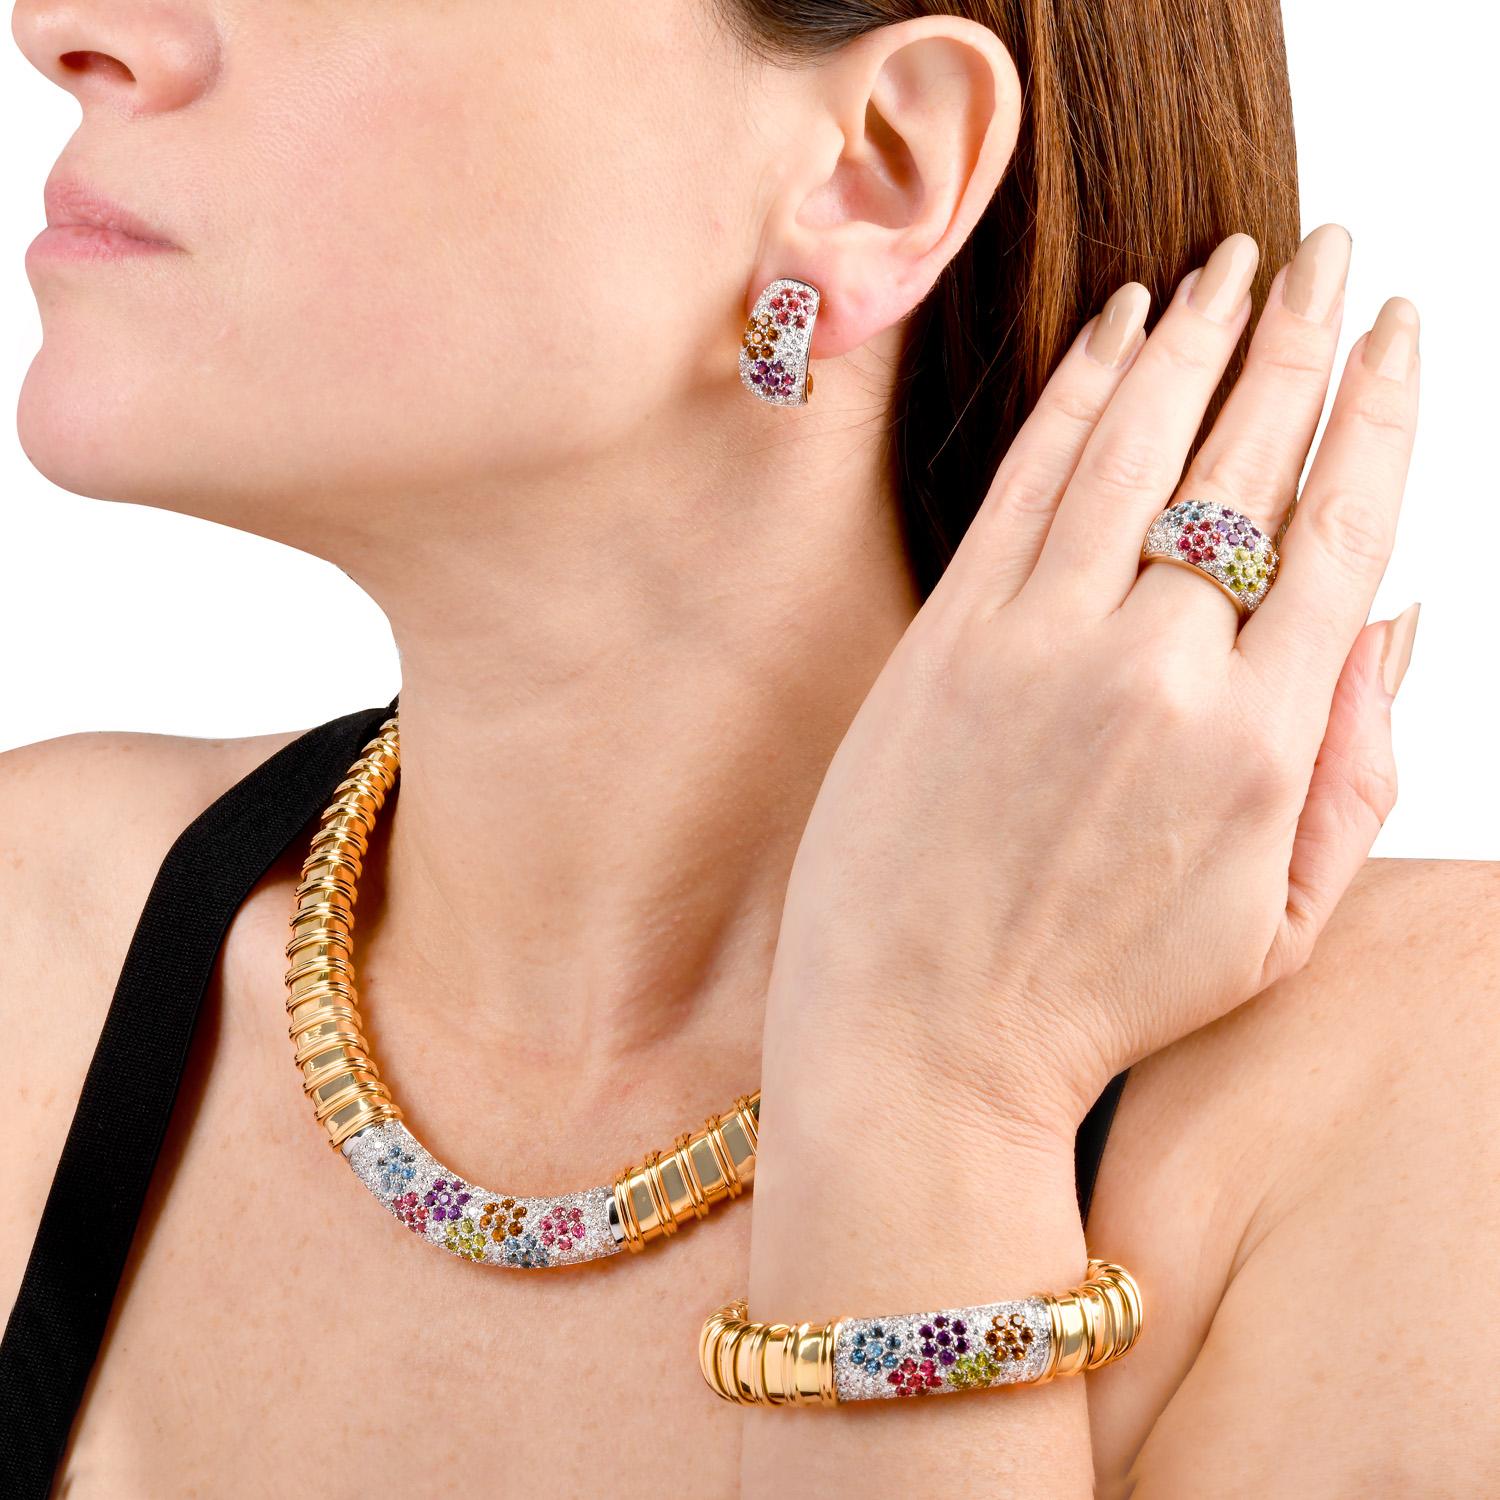 atement Suite of Four from Nabucco Collection.

Presenting a beautiful statement Necklace, Bracelet, Earrings, and ring. All are forged in 18K Yellow gold from the house of Roberto Coin Jewelry. These Grooved textured pieces are set with natural